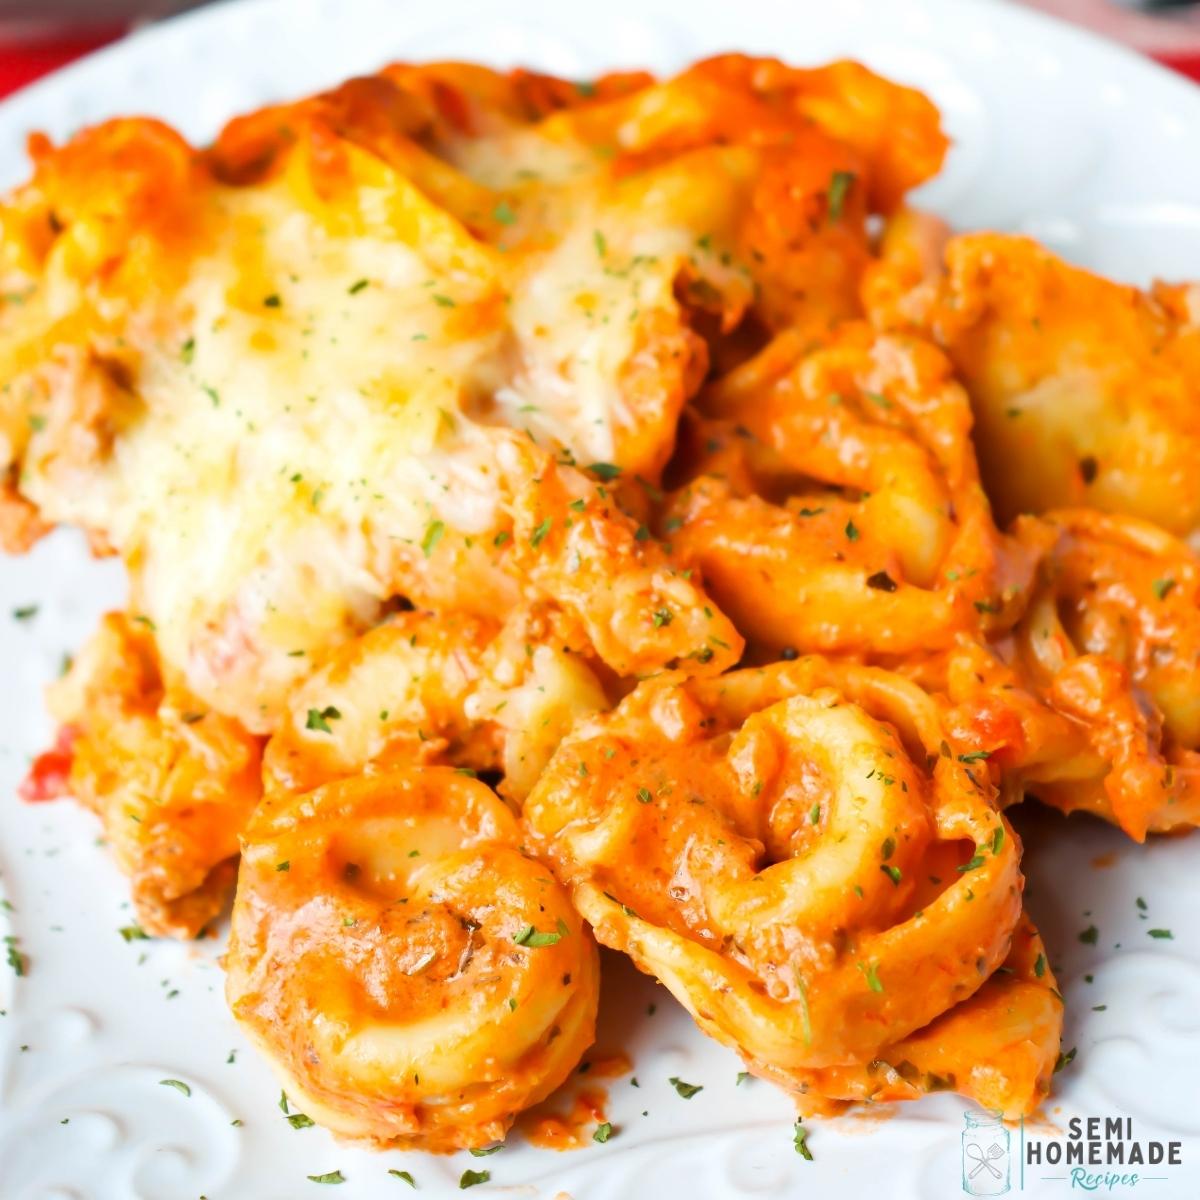 Baked Cheesy Tortellini Casserole - Ground Turkey (or ground beef), is seasoned and browned before being mixed together with spaghetti sauce, cream cheese and cheesy tortellini before being covered in cheese and baked in the oven.